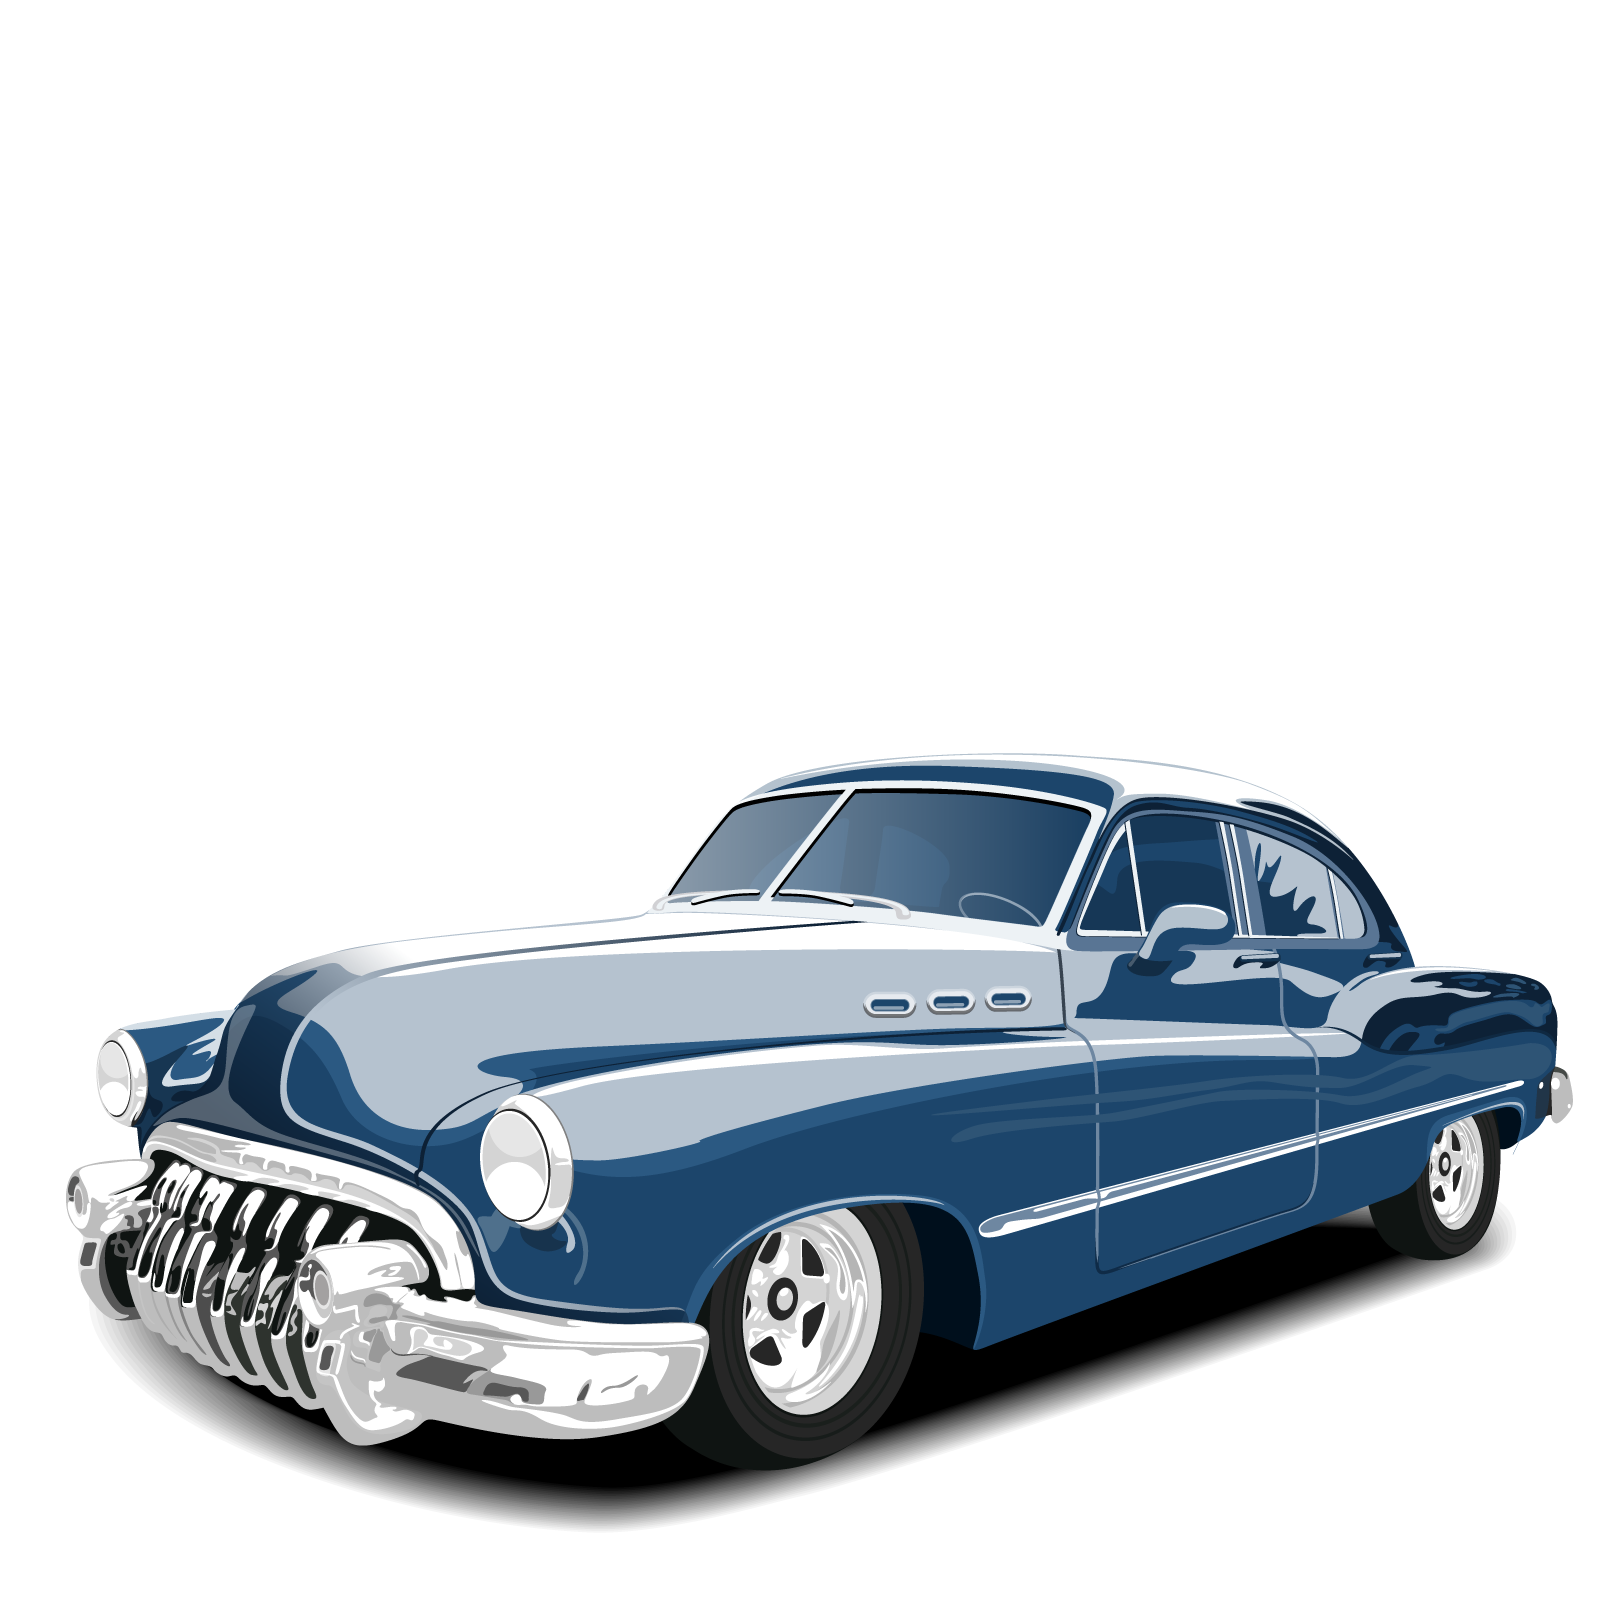 download-vector-vintage-classic-car-free-hd-image-clipart-png-free